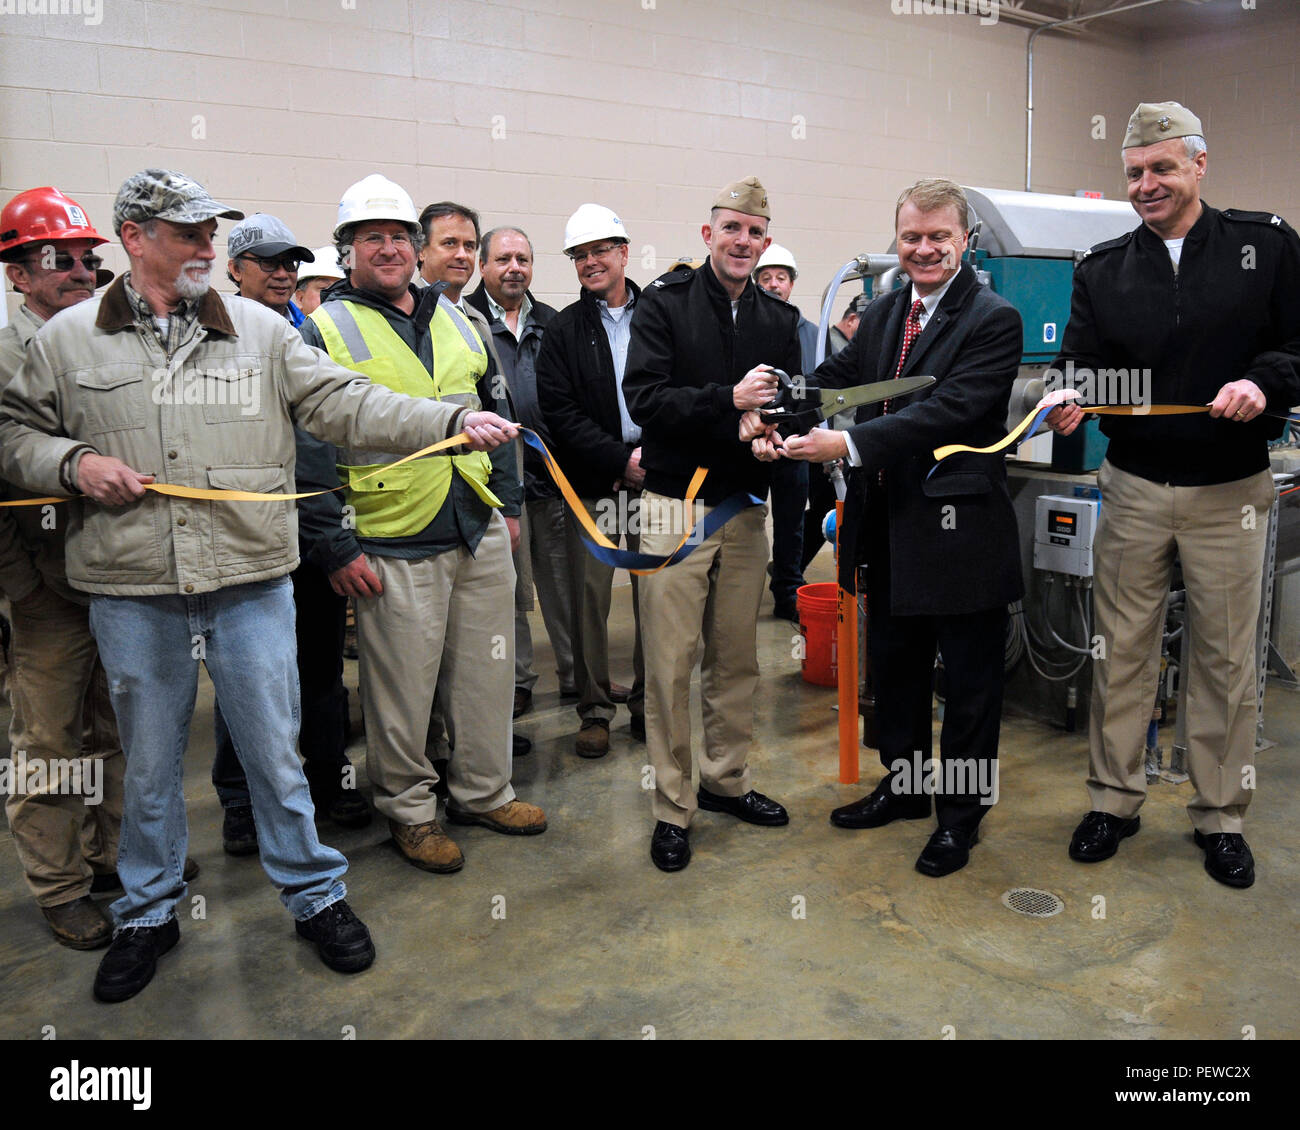 160203-N-ZA795-012   WASHINGTON (Feb. 3, 2016)  Naval Academy Public Works Officer Capt. Nicolas Merry and Naval Support Activity (NSA) Annapolis Commanding Officer Logan Jones along with members of Baltimore Water and Electric Company and Naval Facilities and Engineering Command employees participate in a ribbon cutting and open house. This is the first event showcasing energy conservation measures Naval District Washington (NDW) and Naval Facilities Engineering Command Washington have on tap for the Secretary of the Navy Great Green Fleet initiative. (U.S. Navy photo by Mass Communication Sp Stock Photo